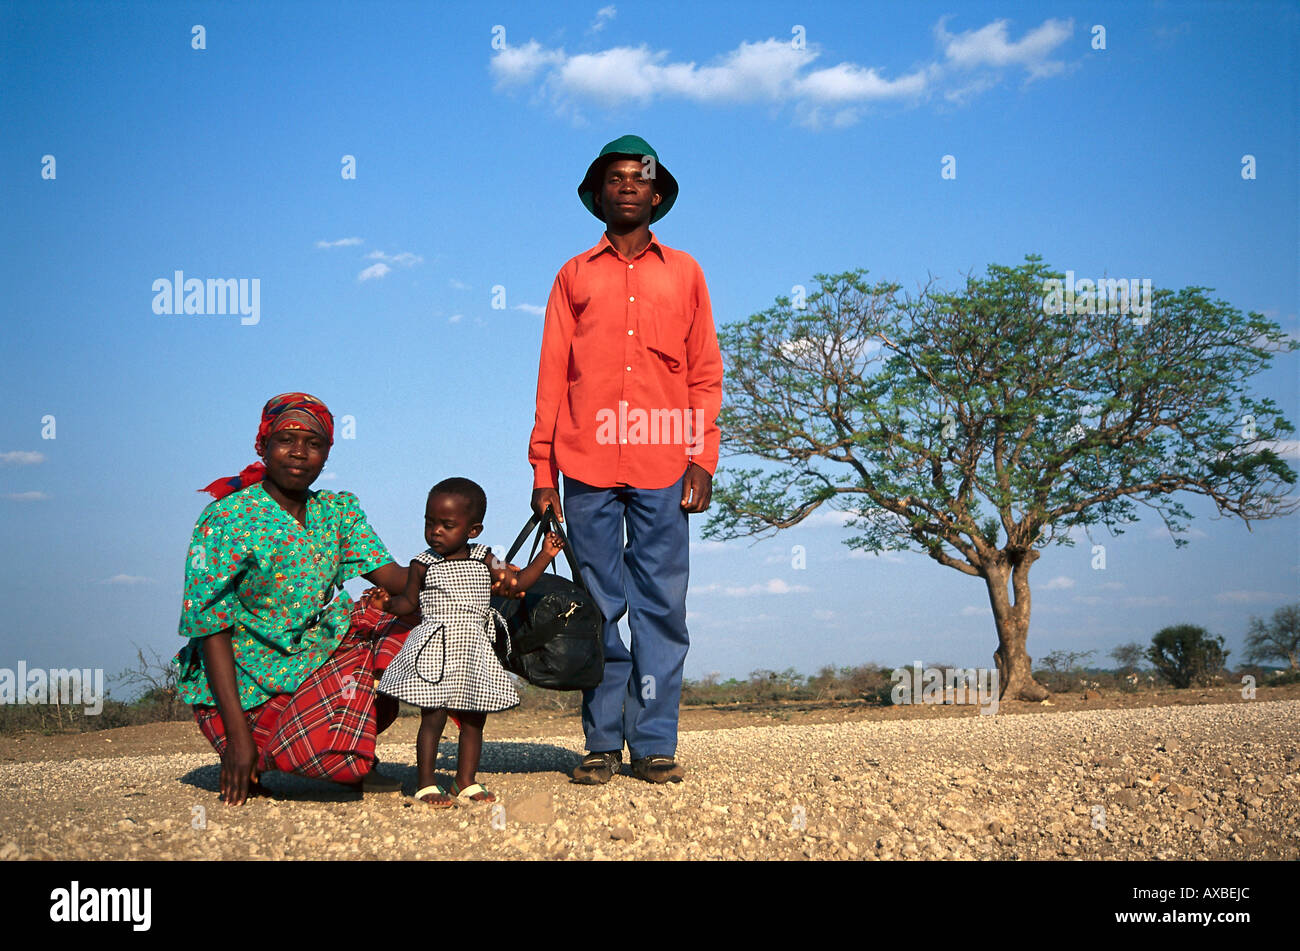 Family Portrait near Swasiland, South Africa Stock Photo